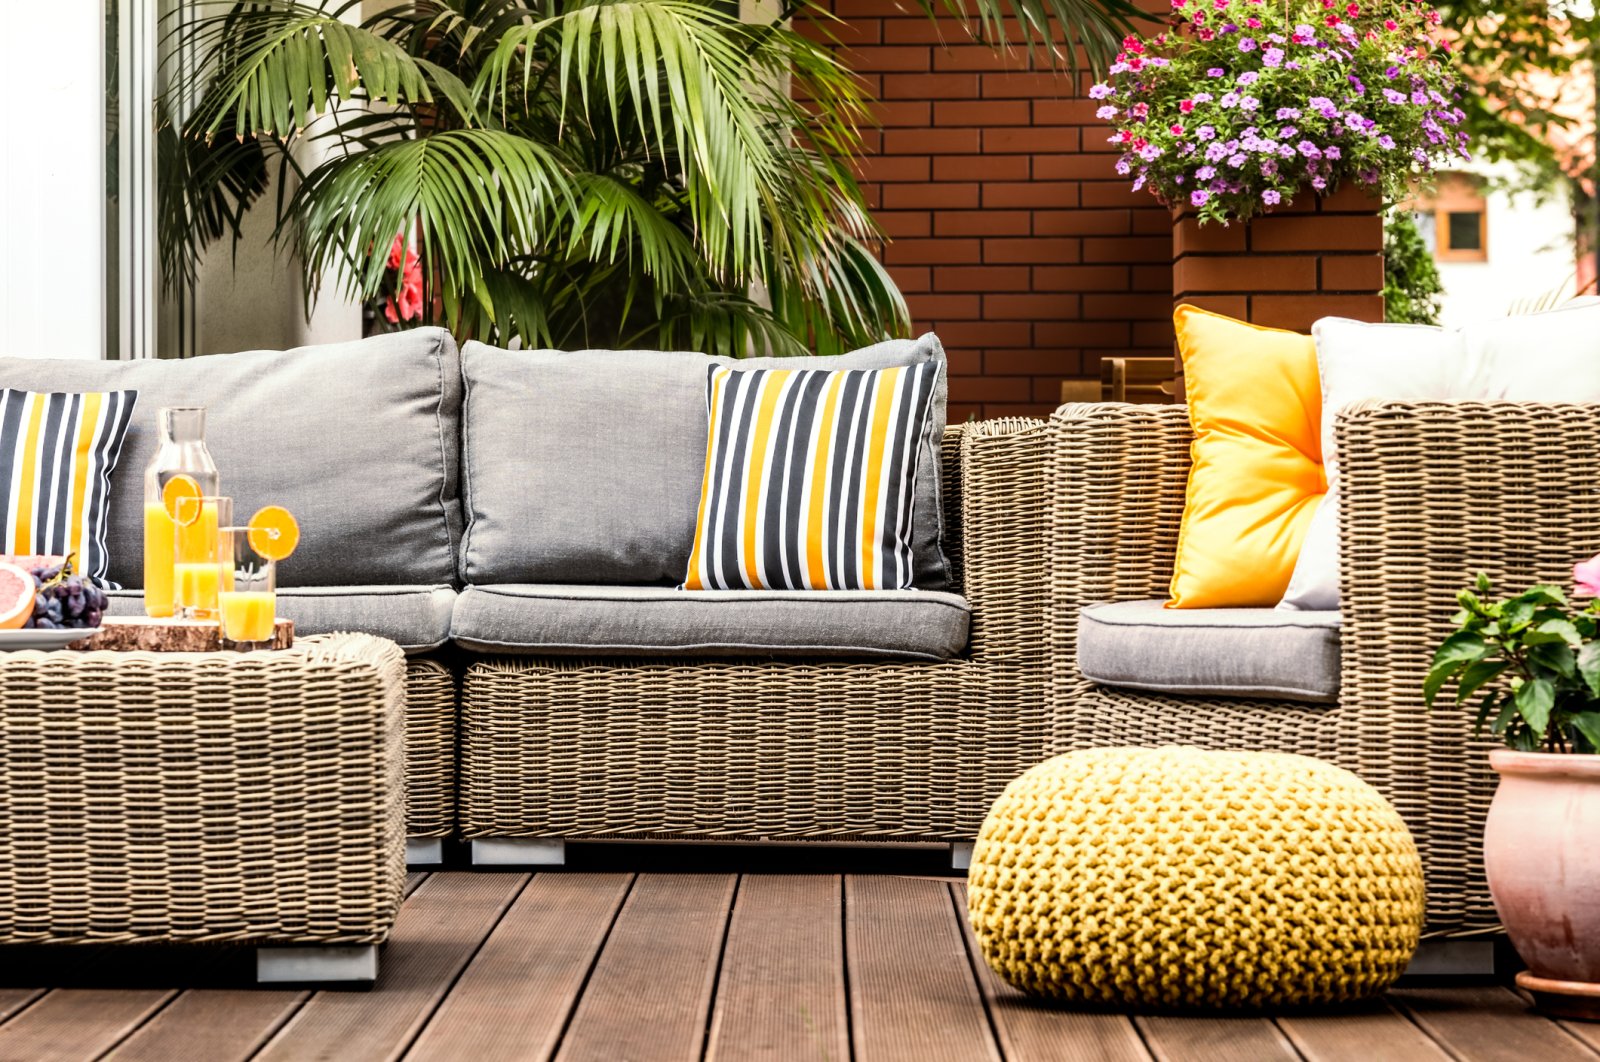 Redecorating your outdoor living spaces can transform your whole mood. (iStock Photo)